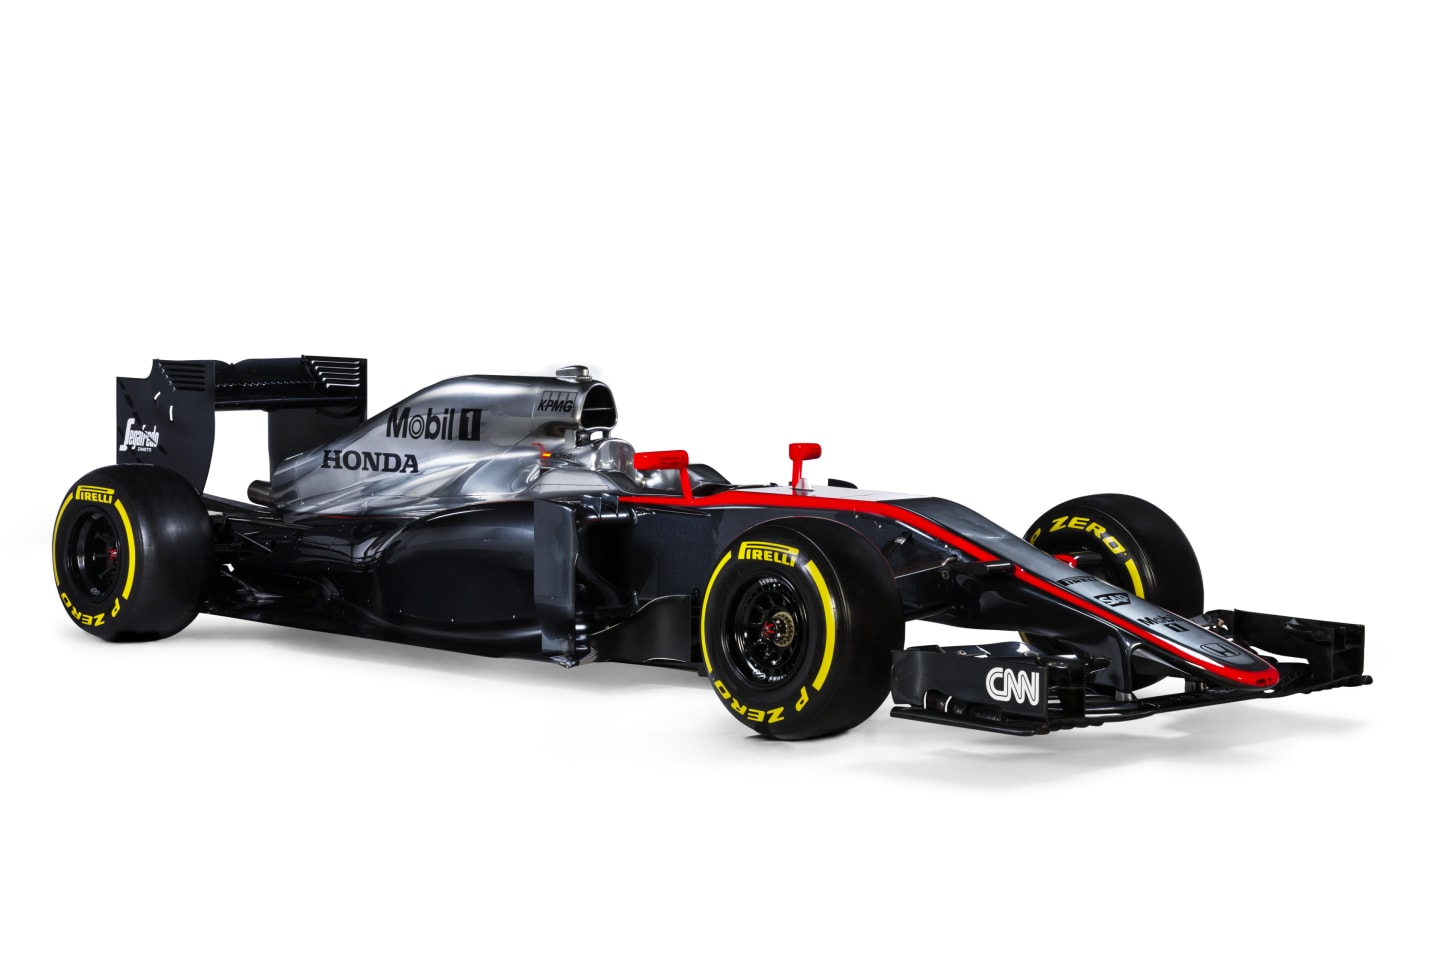 The pre-season livery used by McLaren for their MP4-30. Chrome was later swapped to black...